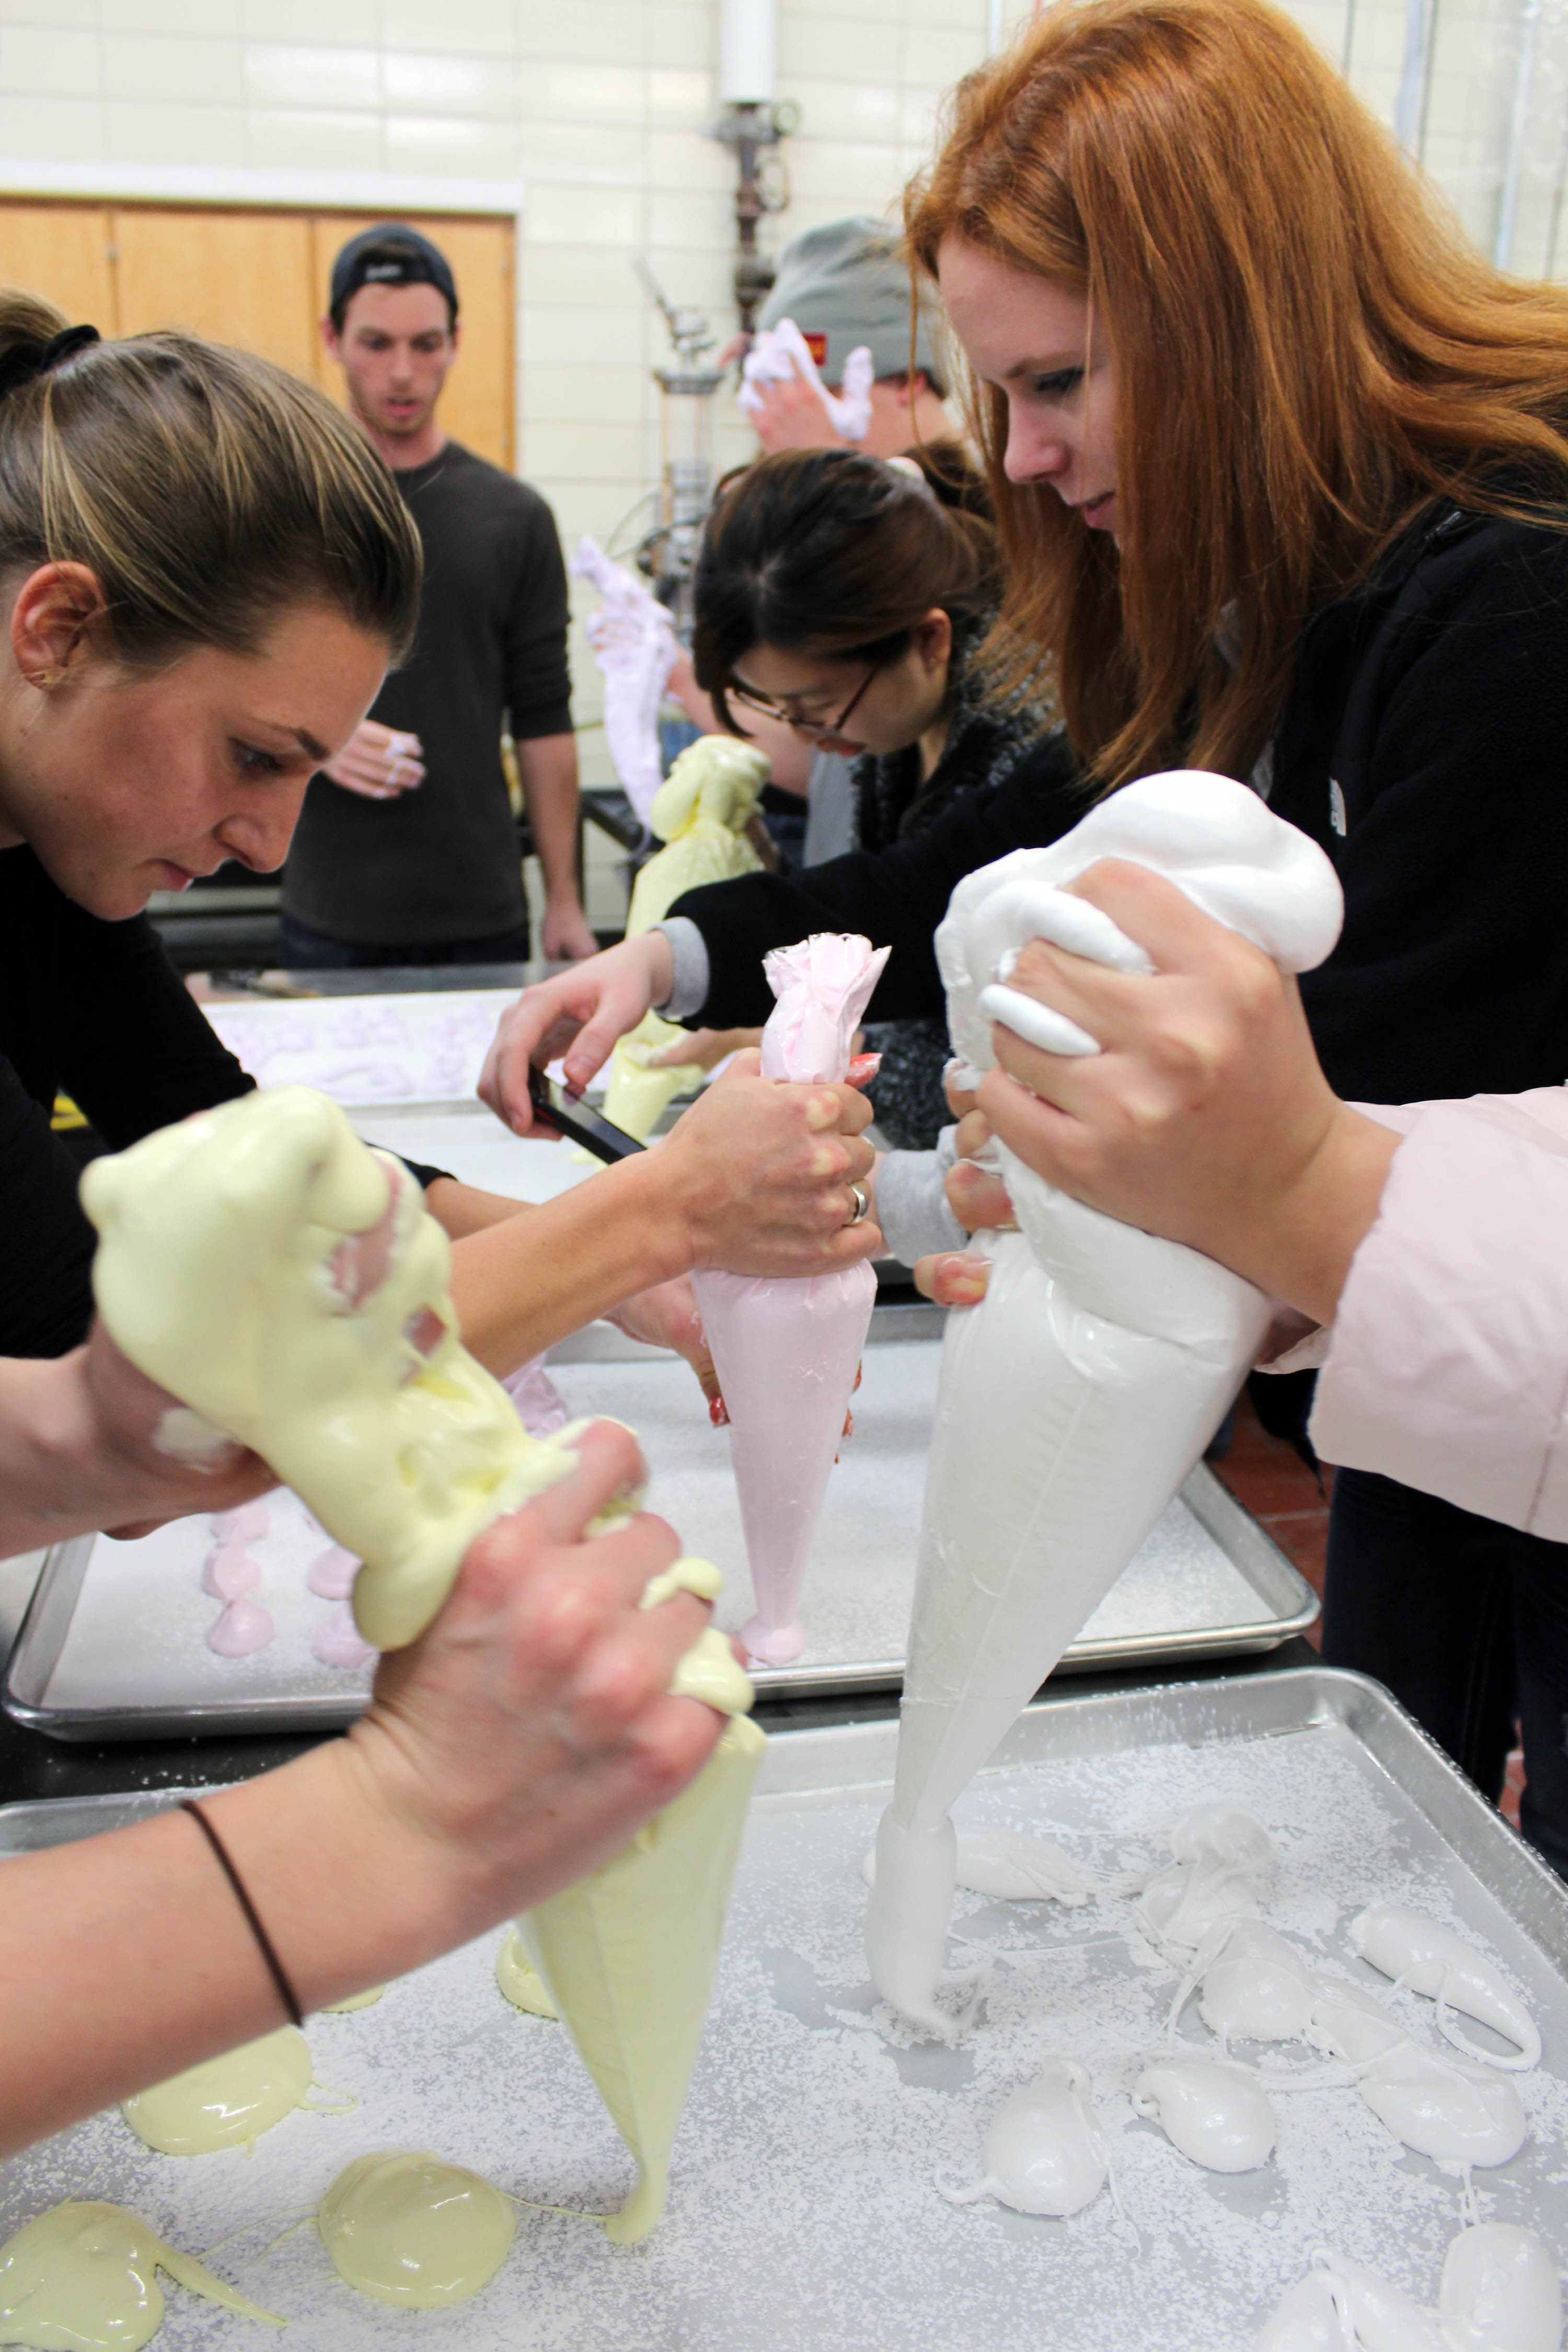 Students use icing bags to pipe their marshmallow fluff onto starch trays in the last step of the marshmallow making process.